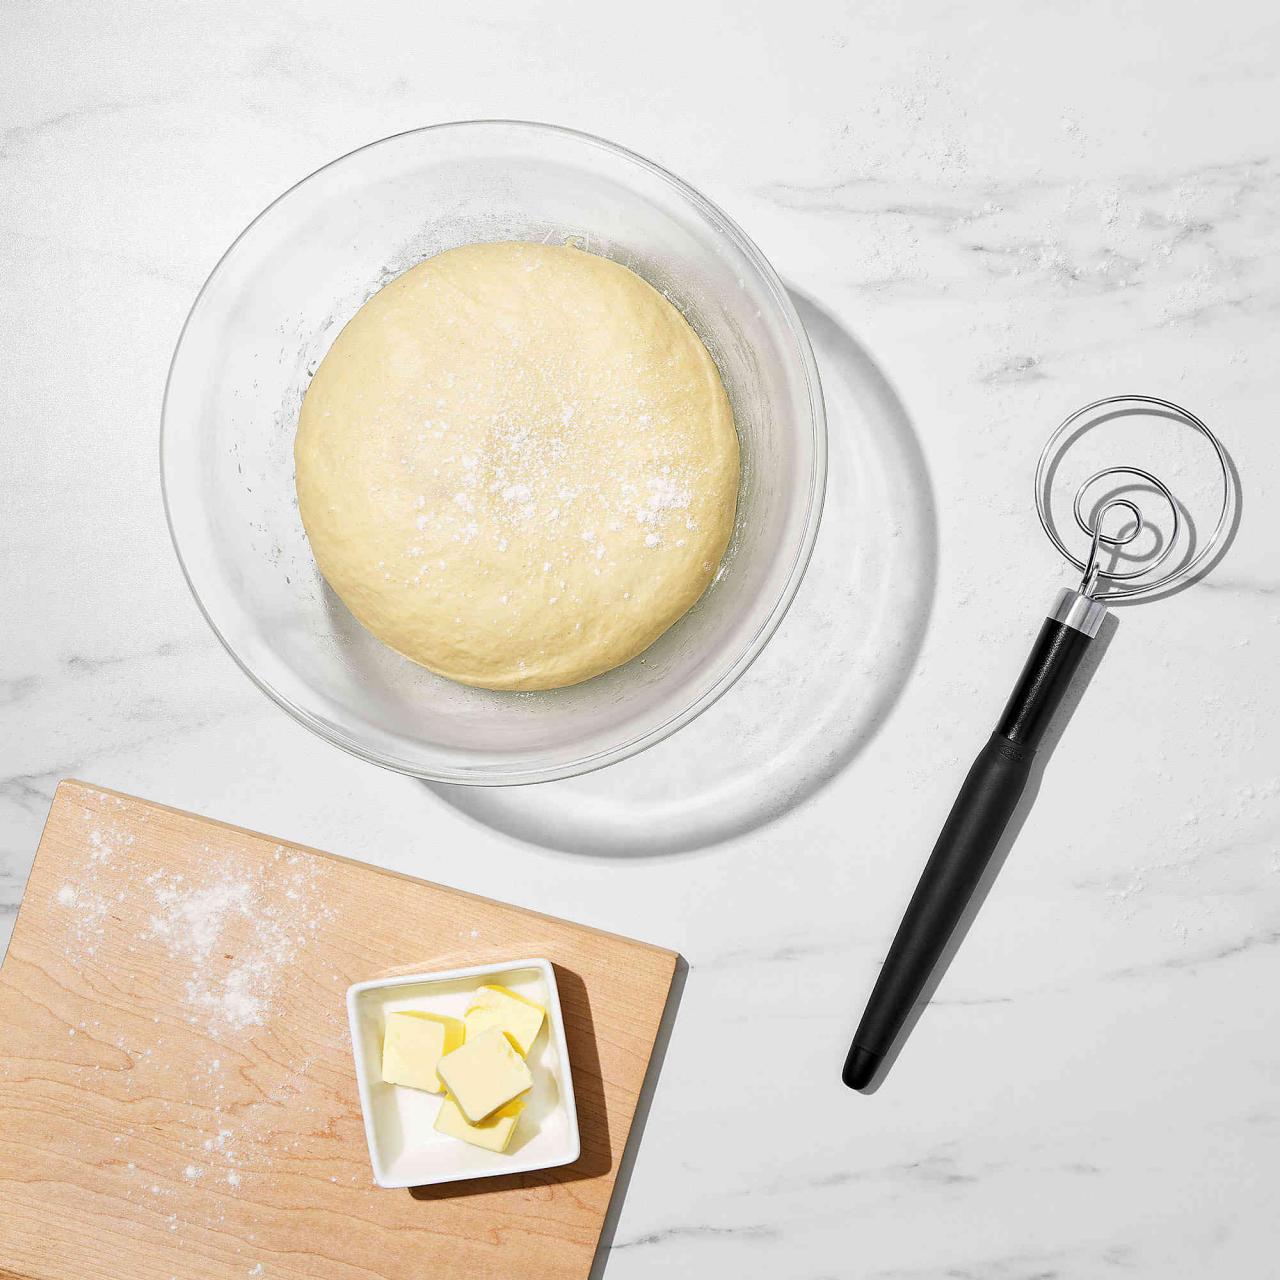 https://food.fnr.sndimg.com/content/dam/images/food/products/2020/5/19/rx_oxo-good-grips-dough-whisk.jpeg.rend.hgtvcom.1280.1280.suffix/1589919425918.jpeg